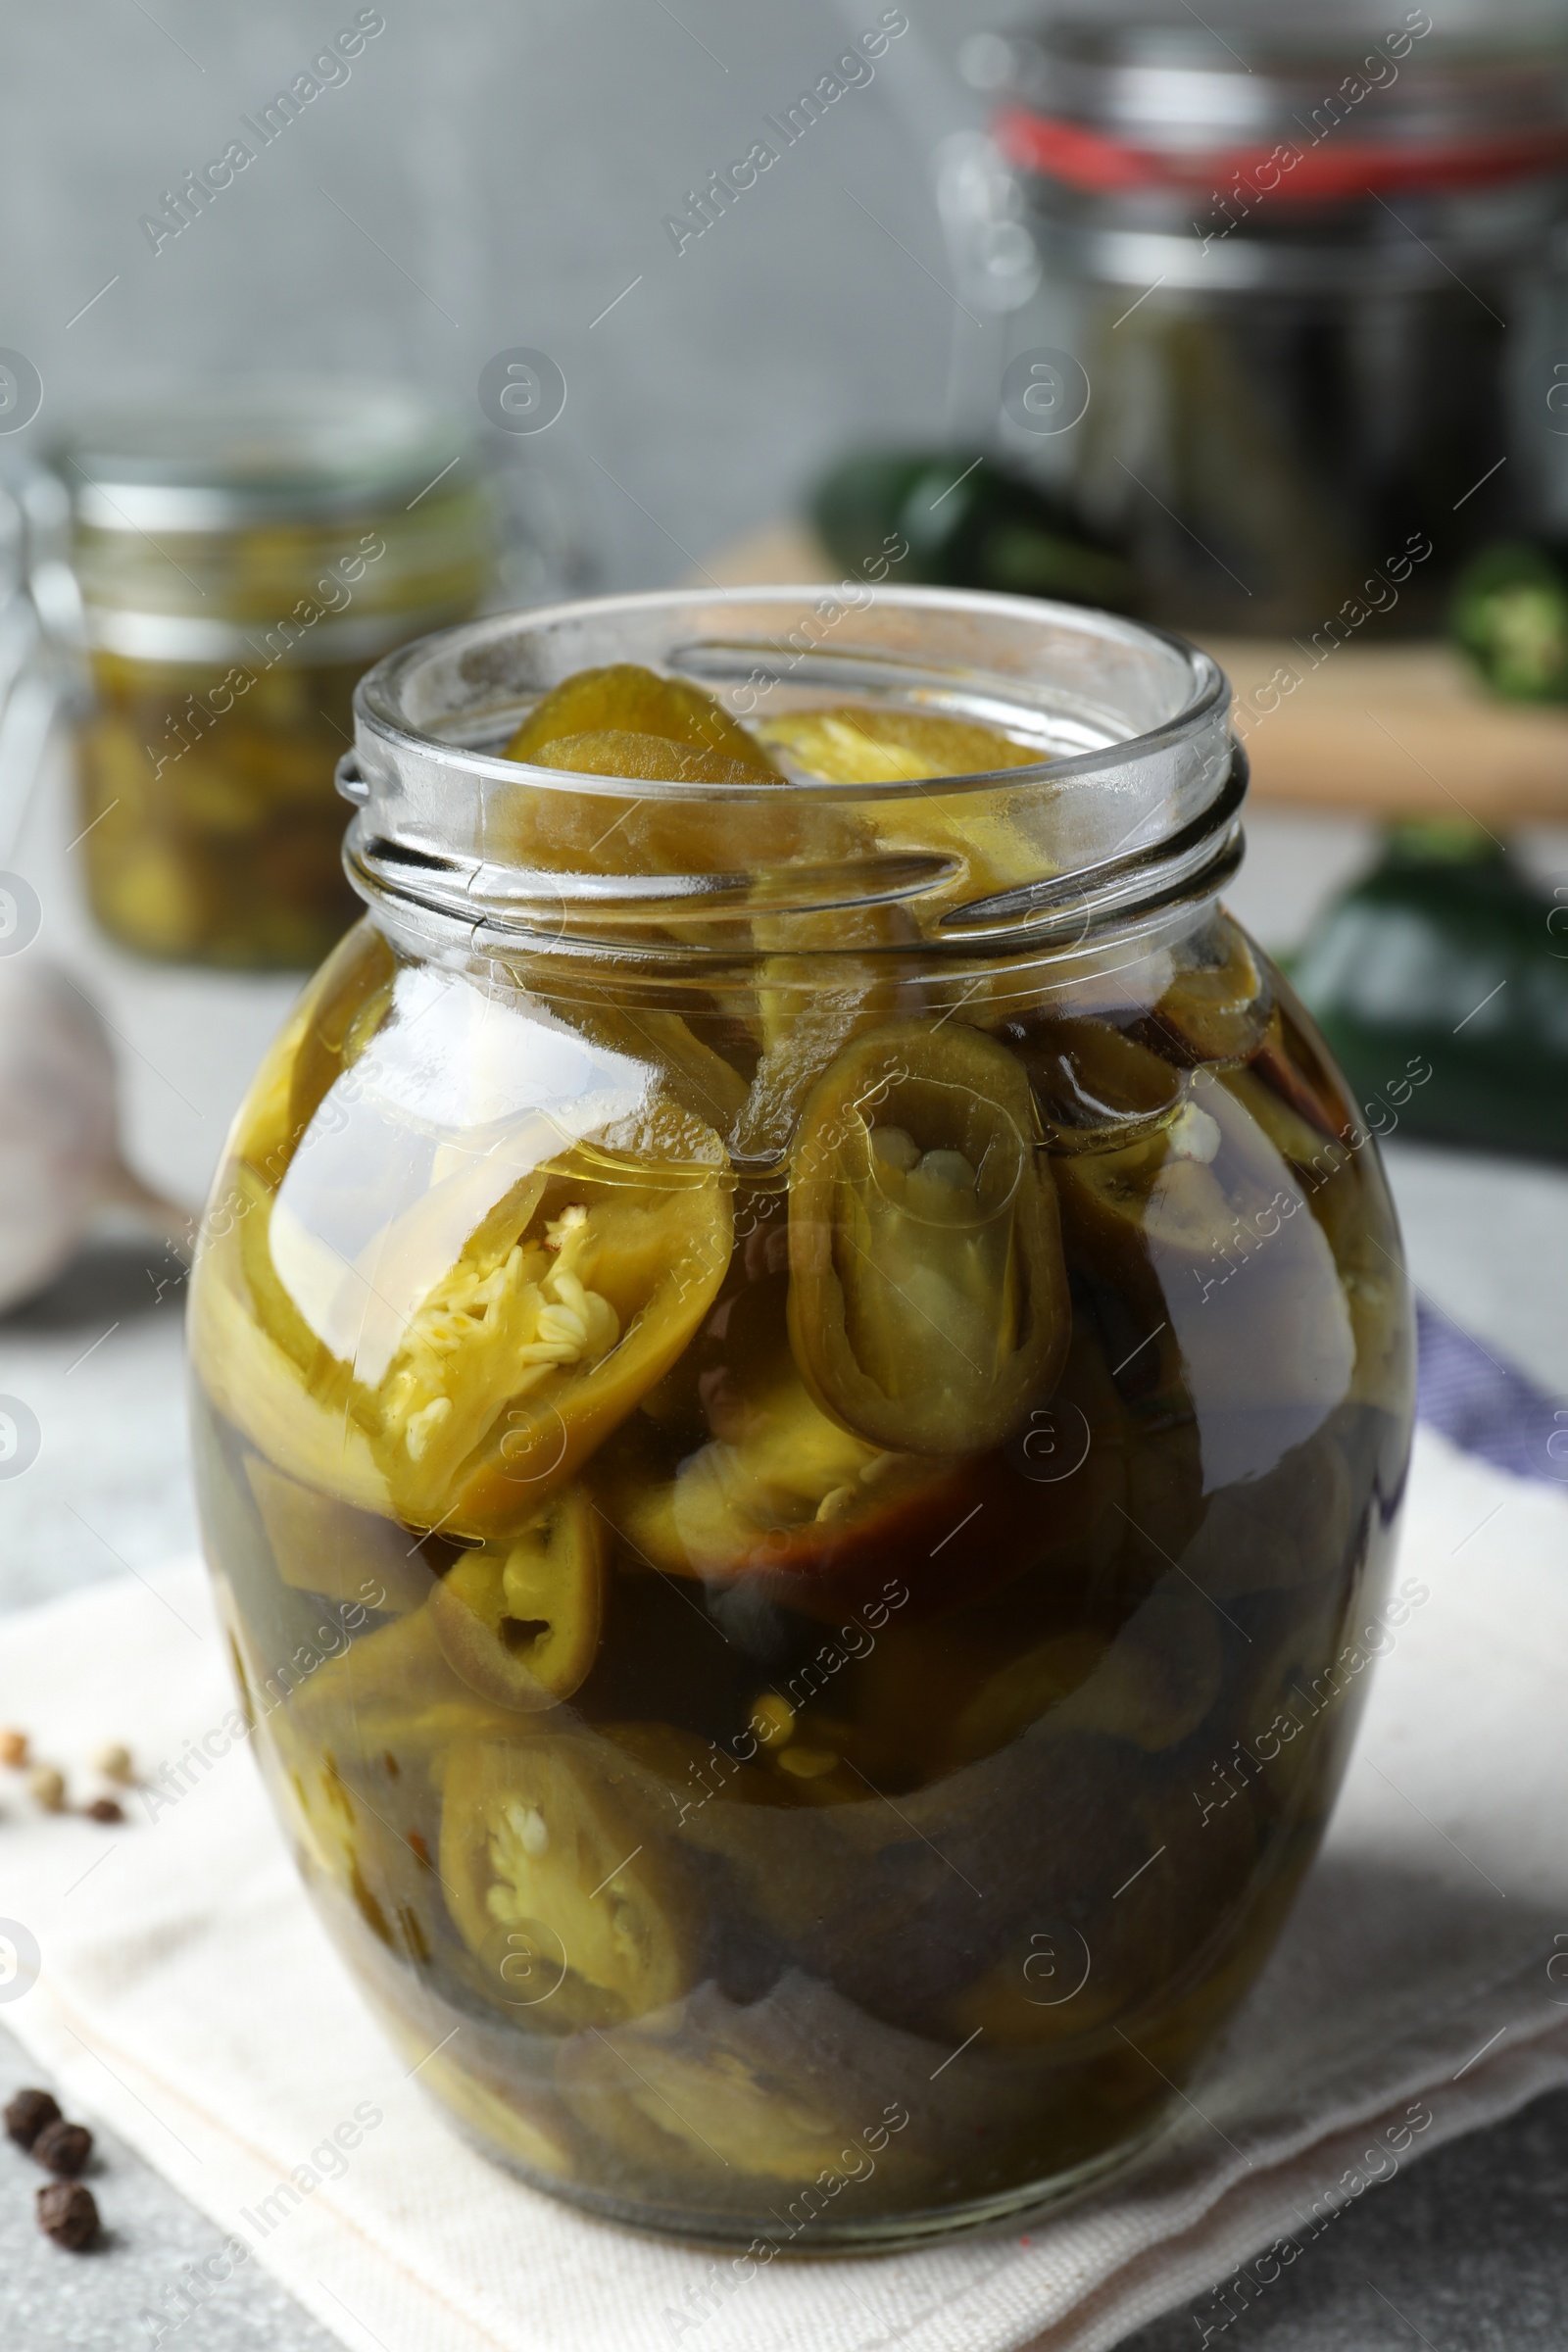 Photo of Glass jar with slices of pickled green jalapeno peppers on table